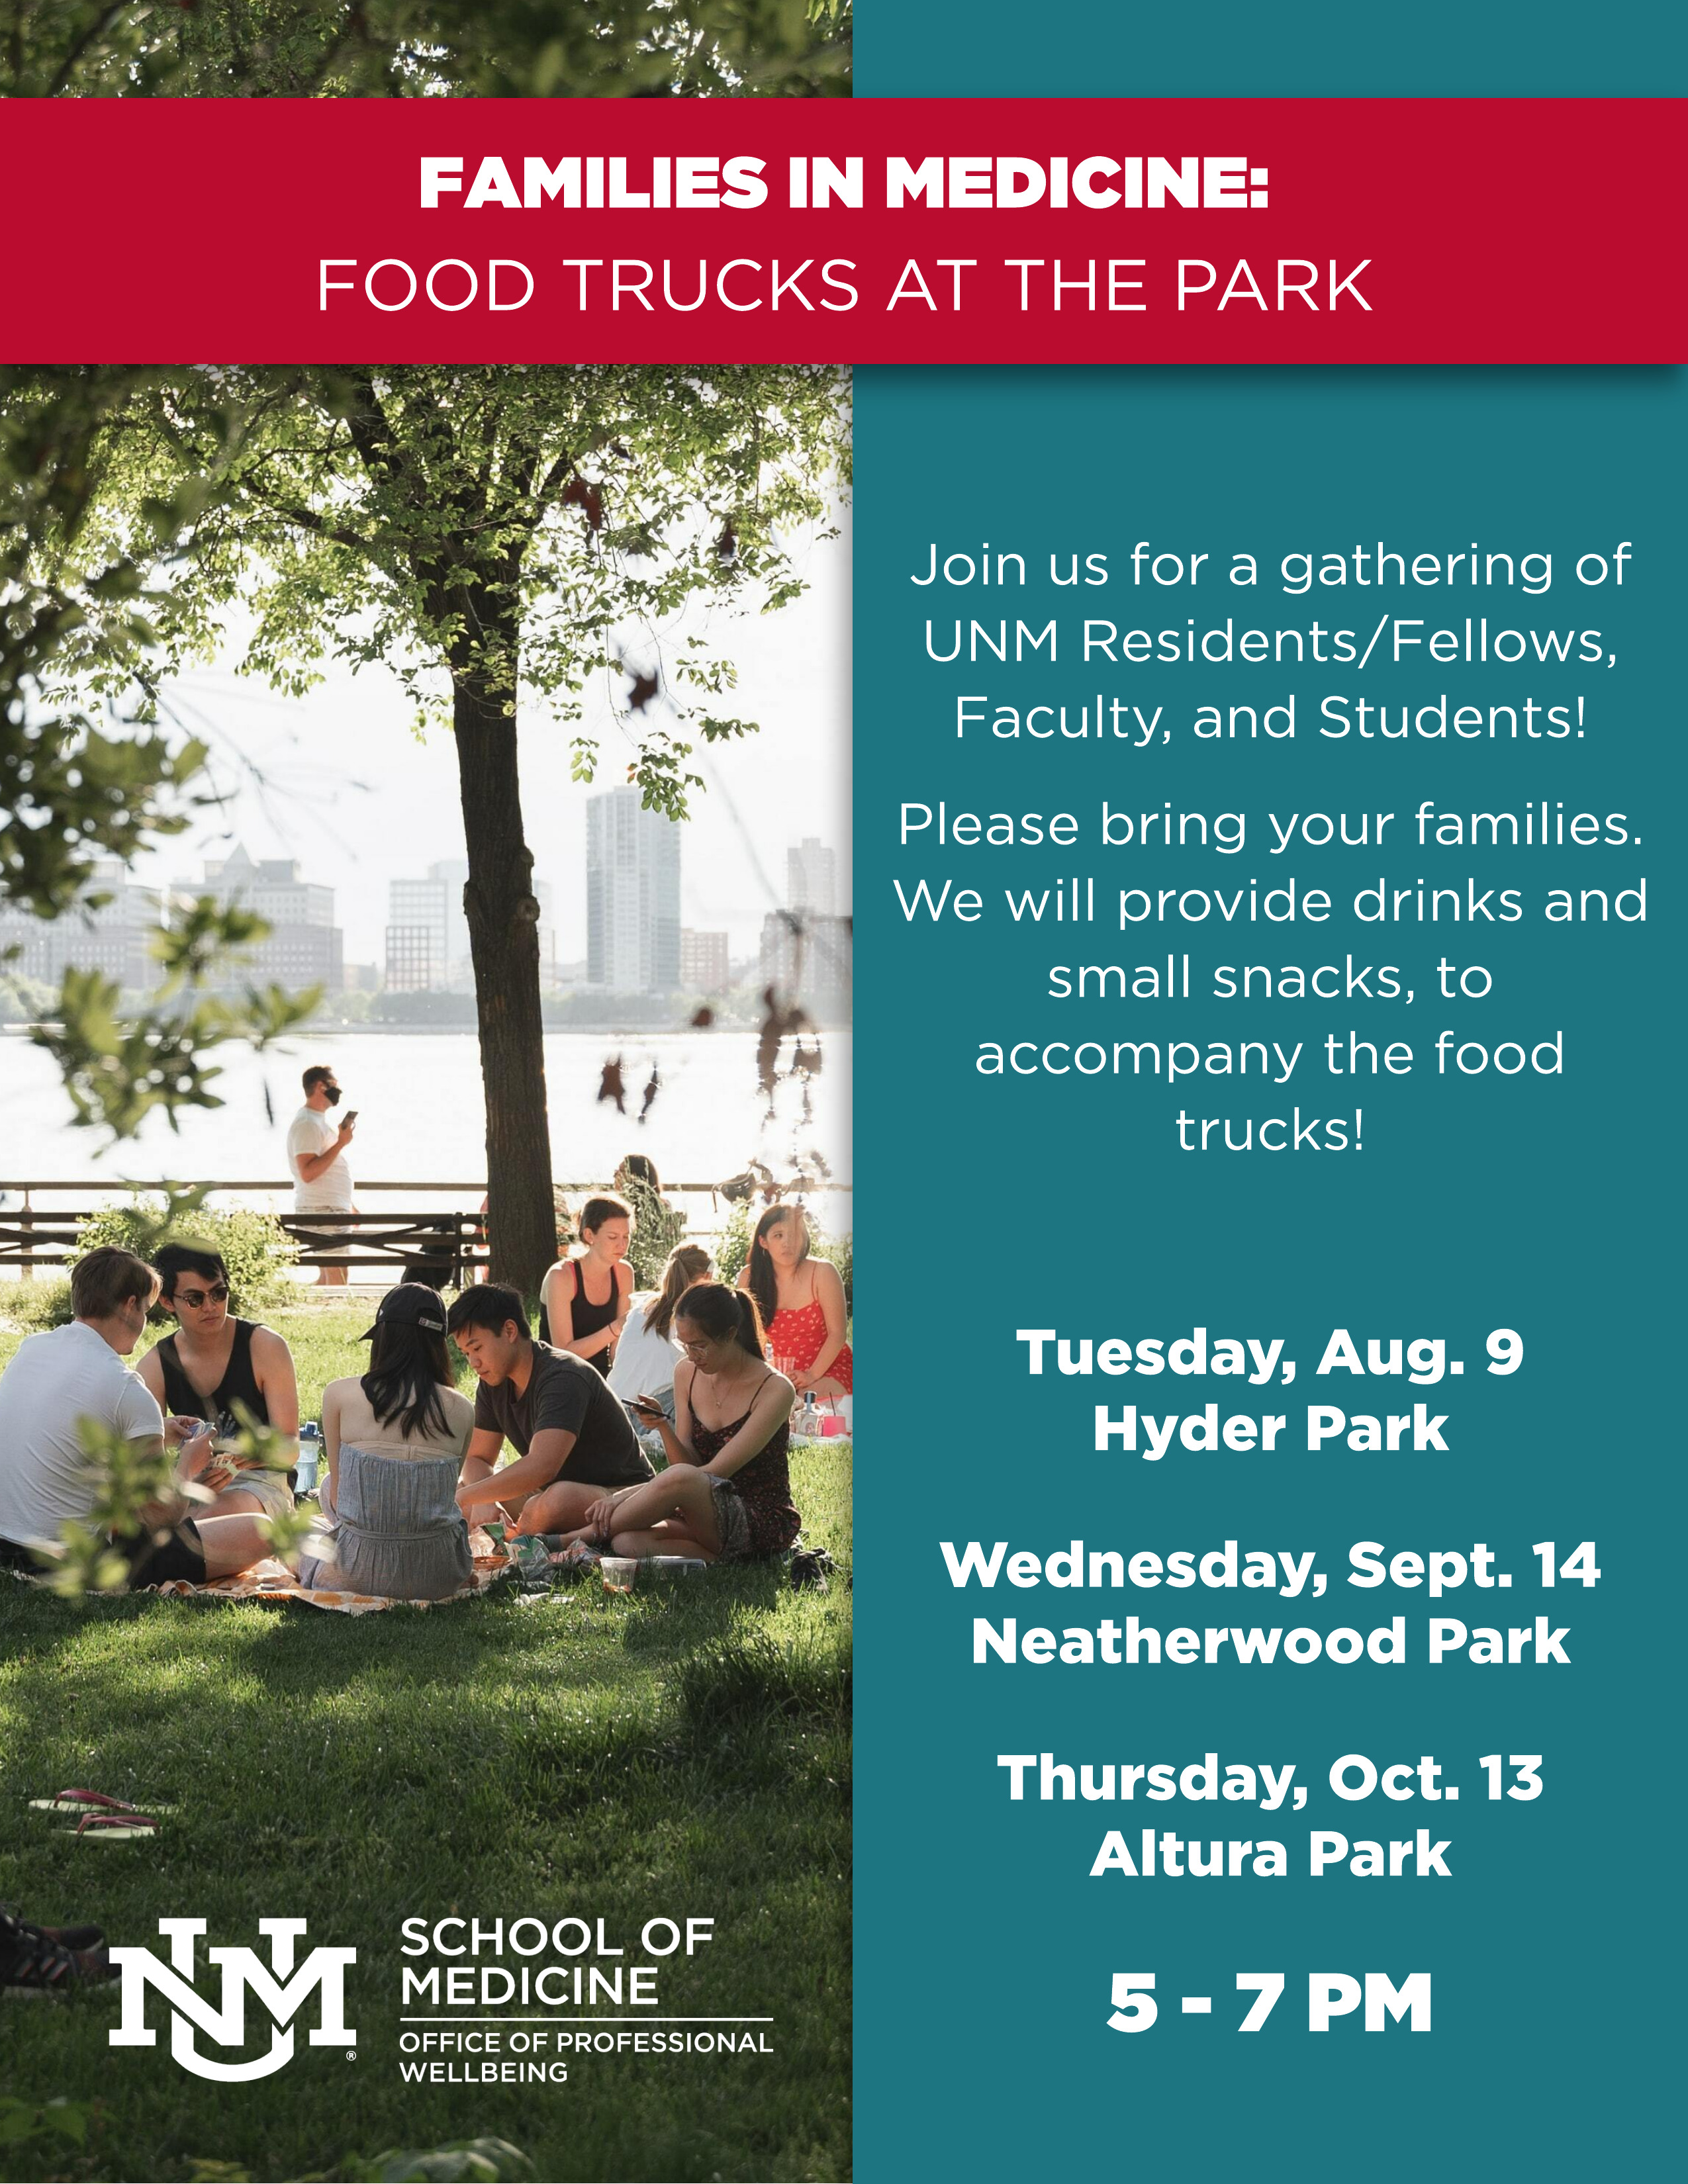 Families in Medicine, Food Trucks at the Park